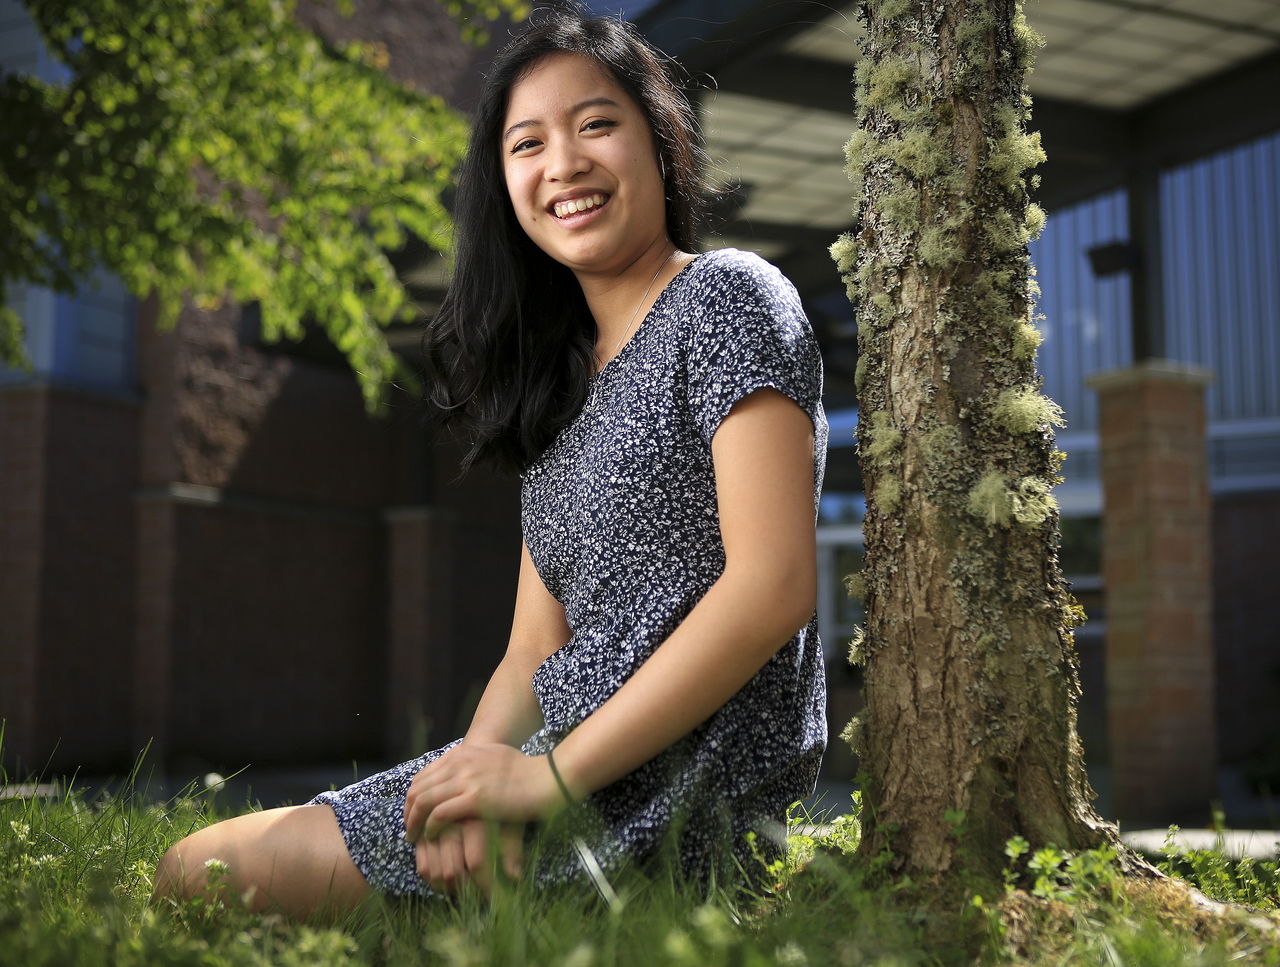 Meadowdale High School senior Cindy Nguyen, 18, is looking forward to pursuing environmental science studies in the fall at Colby College in Maine. She also plays the violin, recently took up the viola and sings in school jazz band.